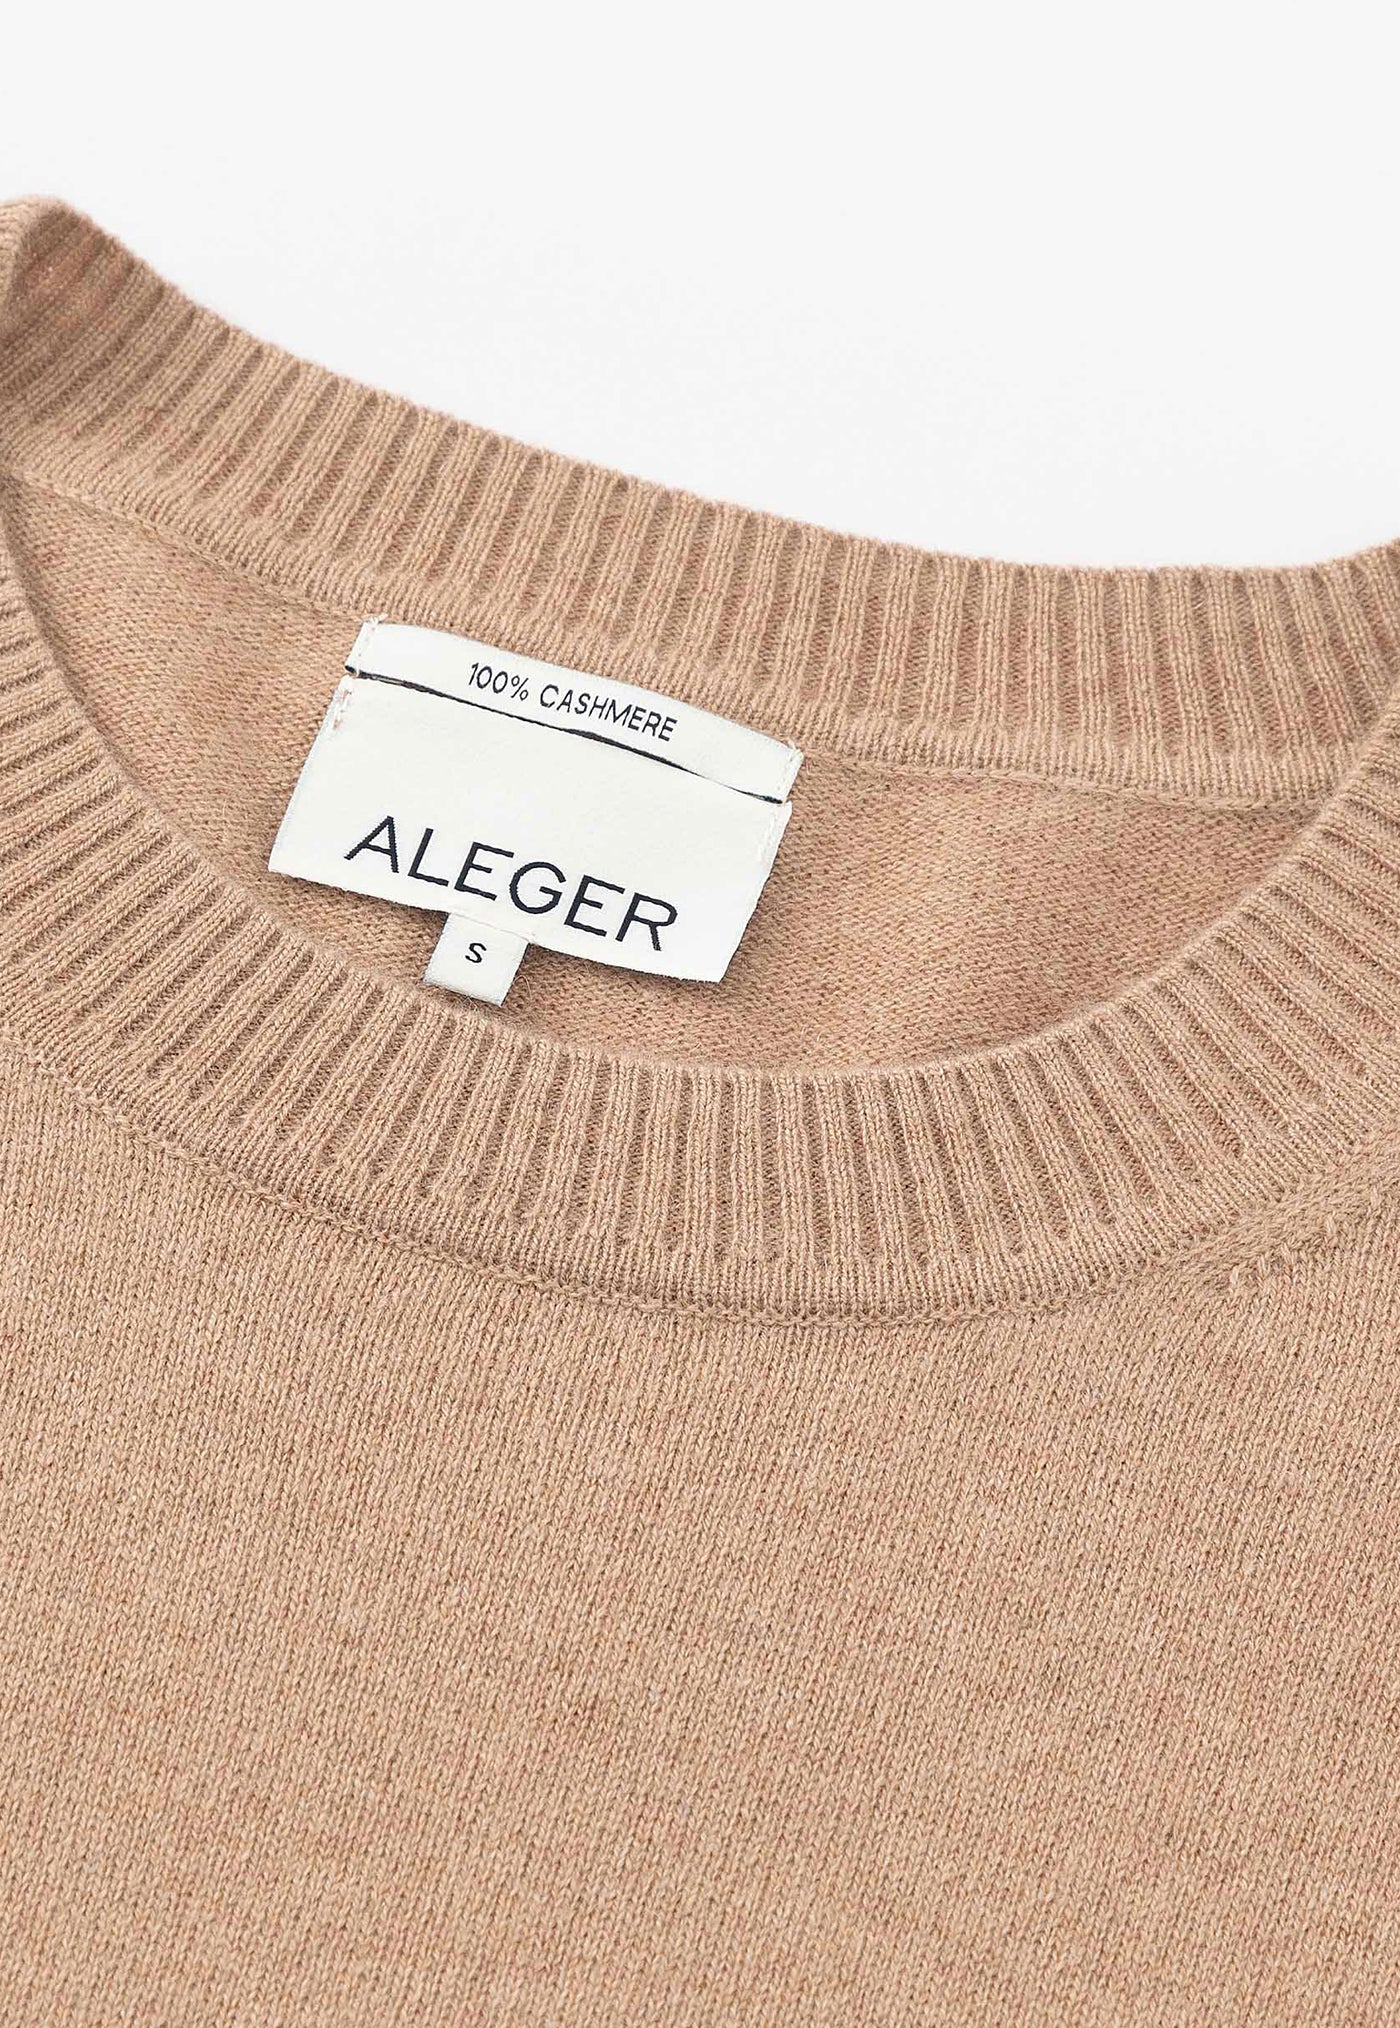 N.39 Cashmere High Low Hem Crew - Tan sold by Angel Divine